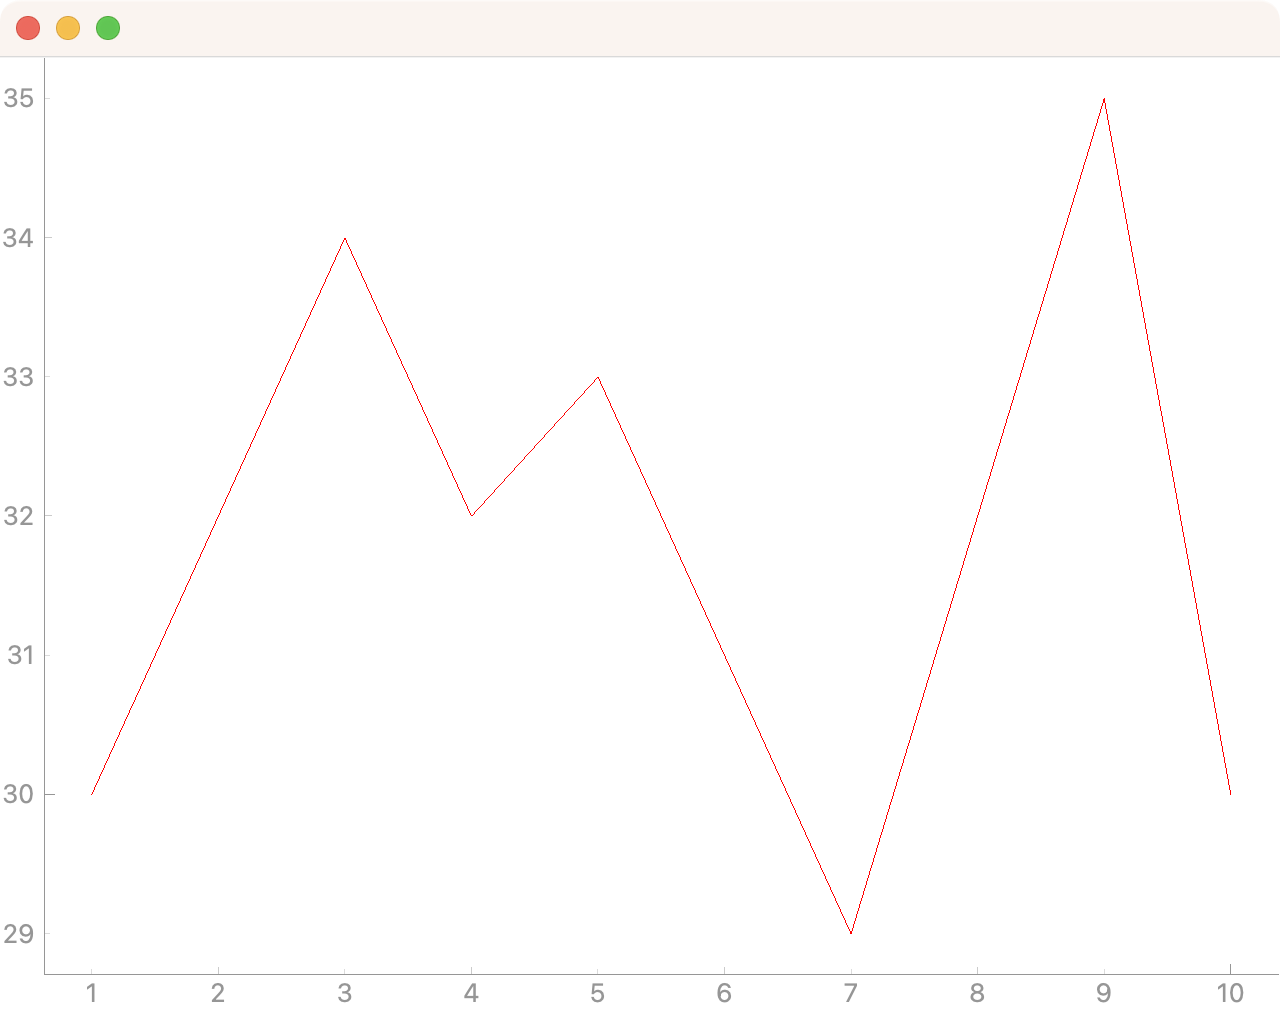 PyQtGraph plot with a red plot line